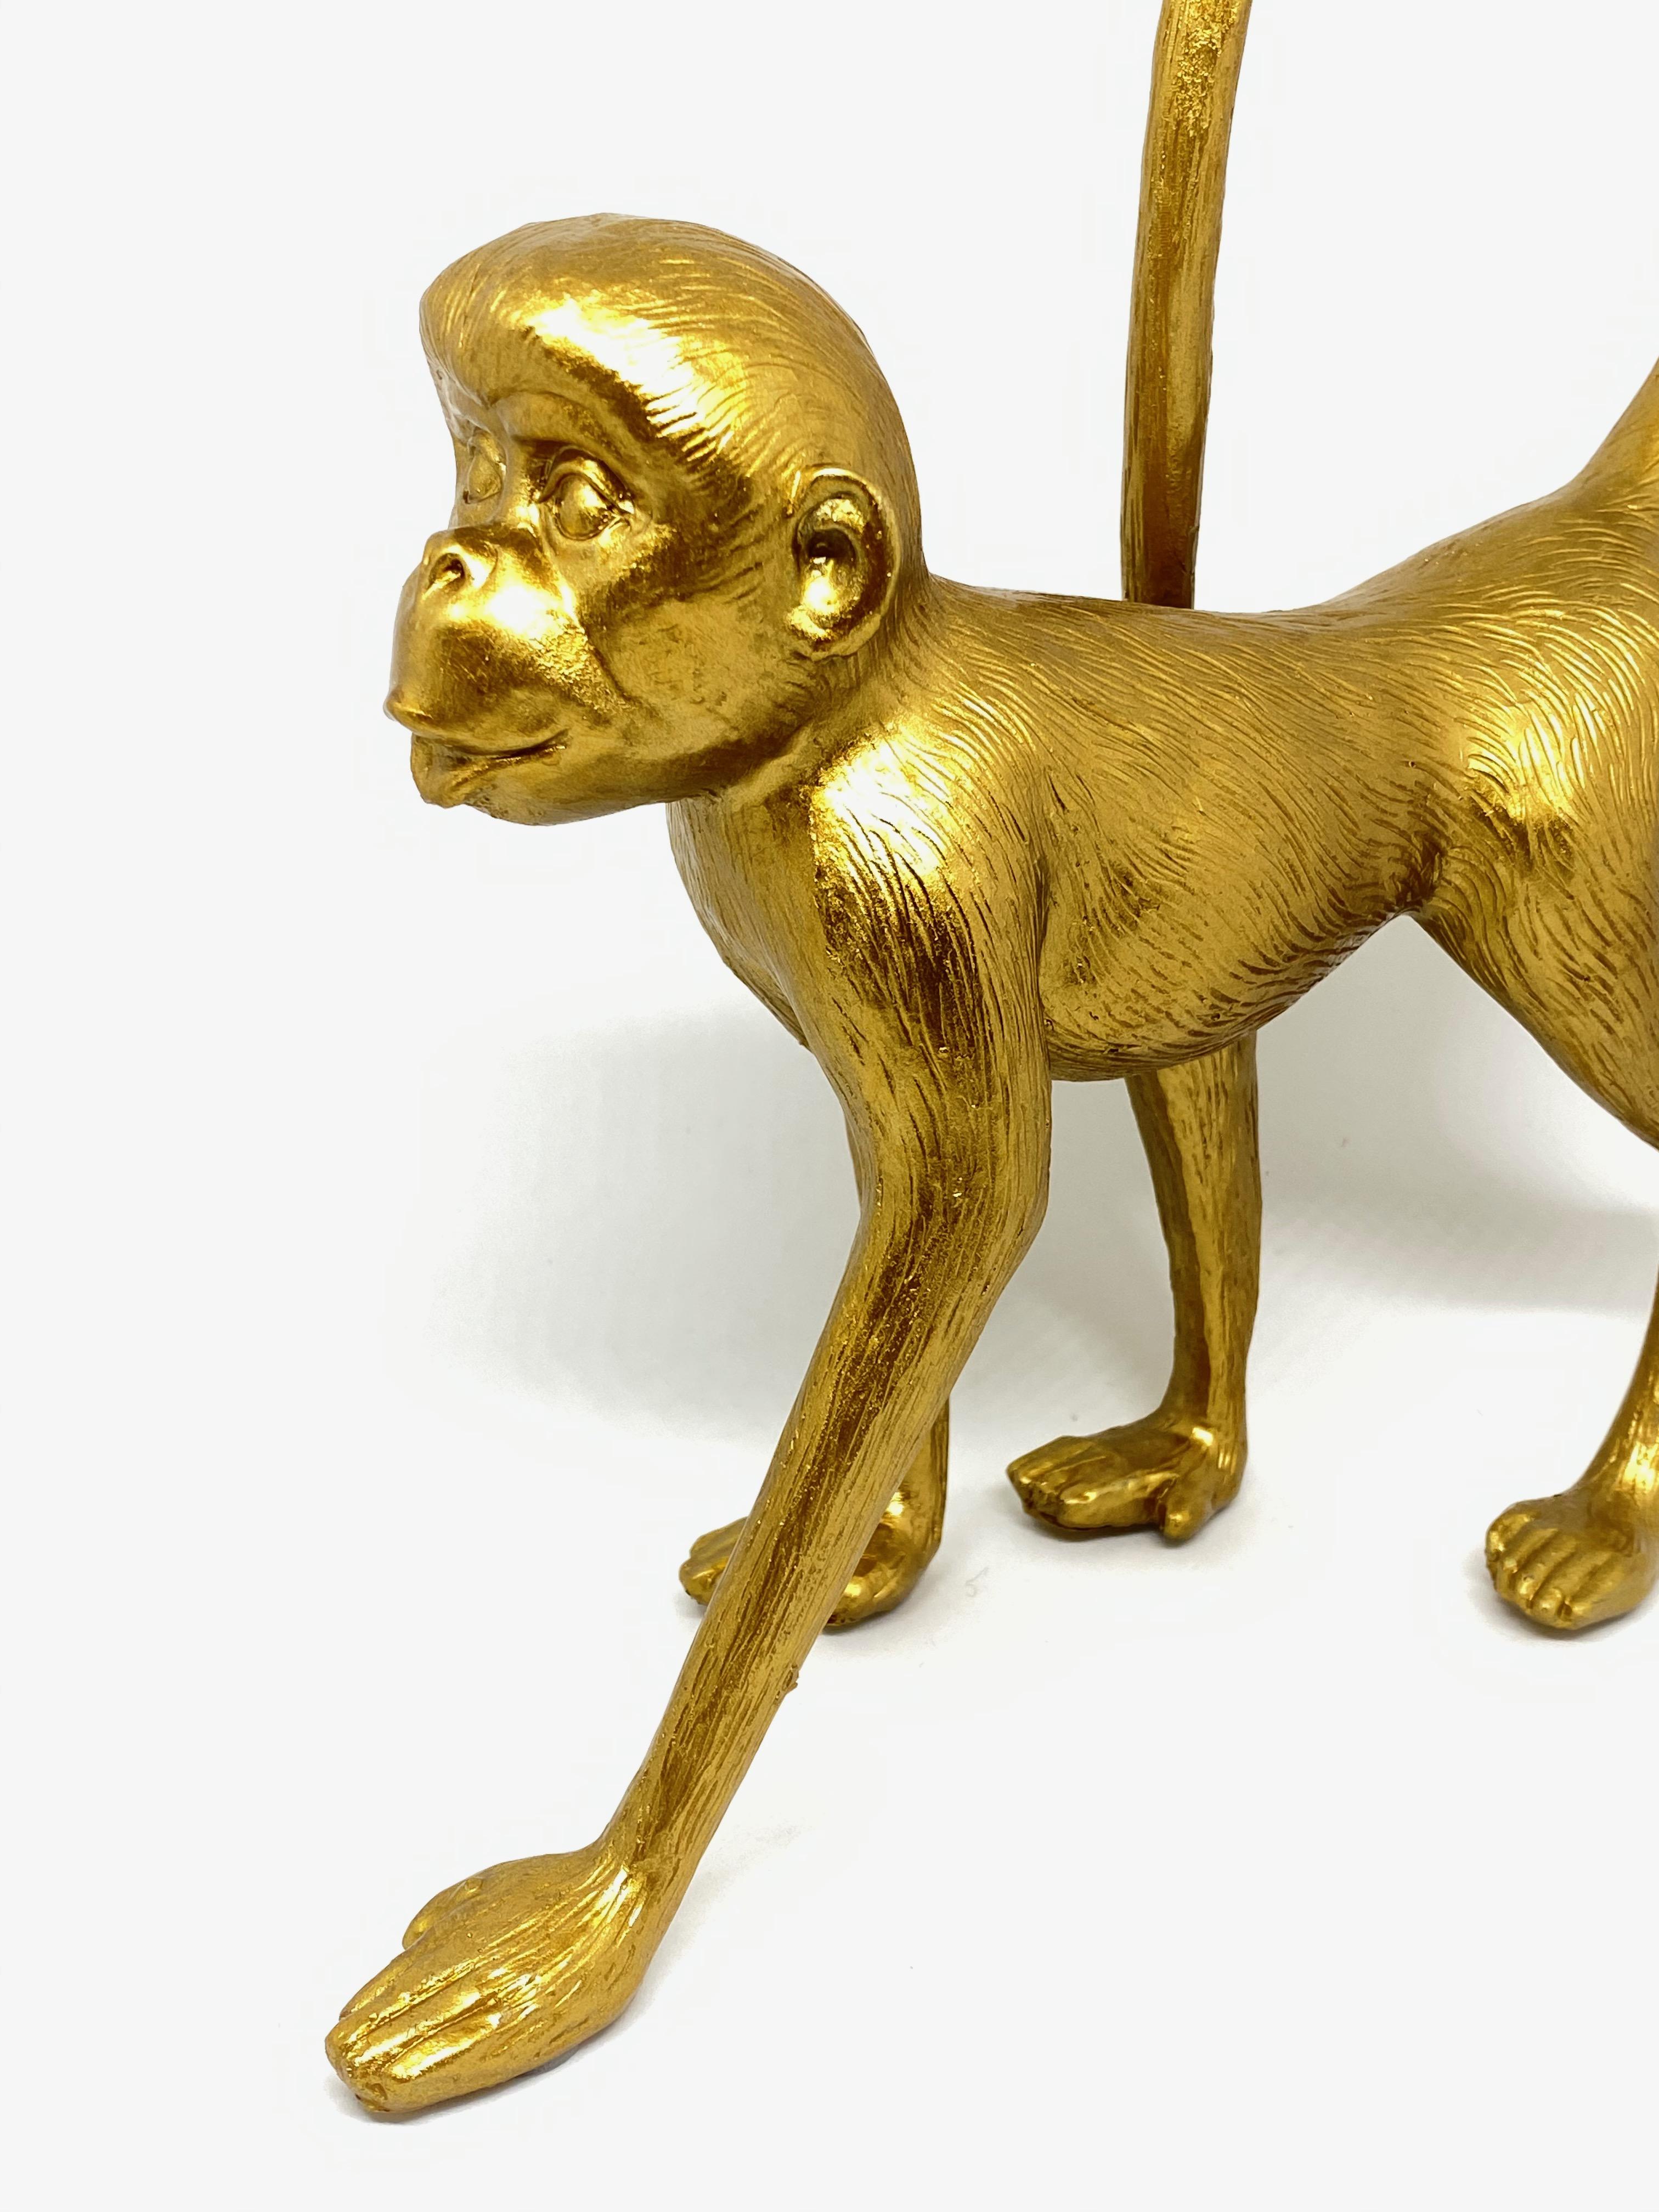 Vintage beautiful monkey animal statue. It is highly decorative, made of resin and gilt hand painted body. A nice addition to the Hollywood Regency interior.